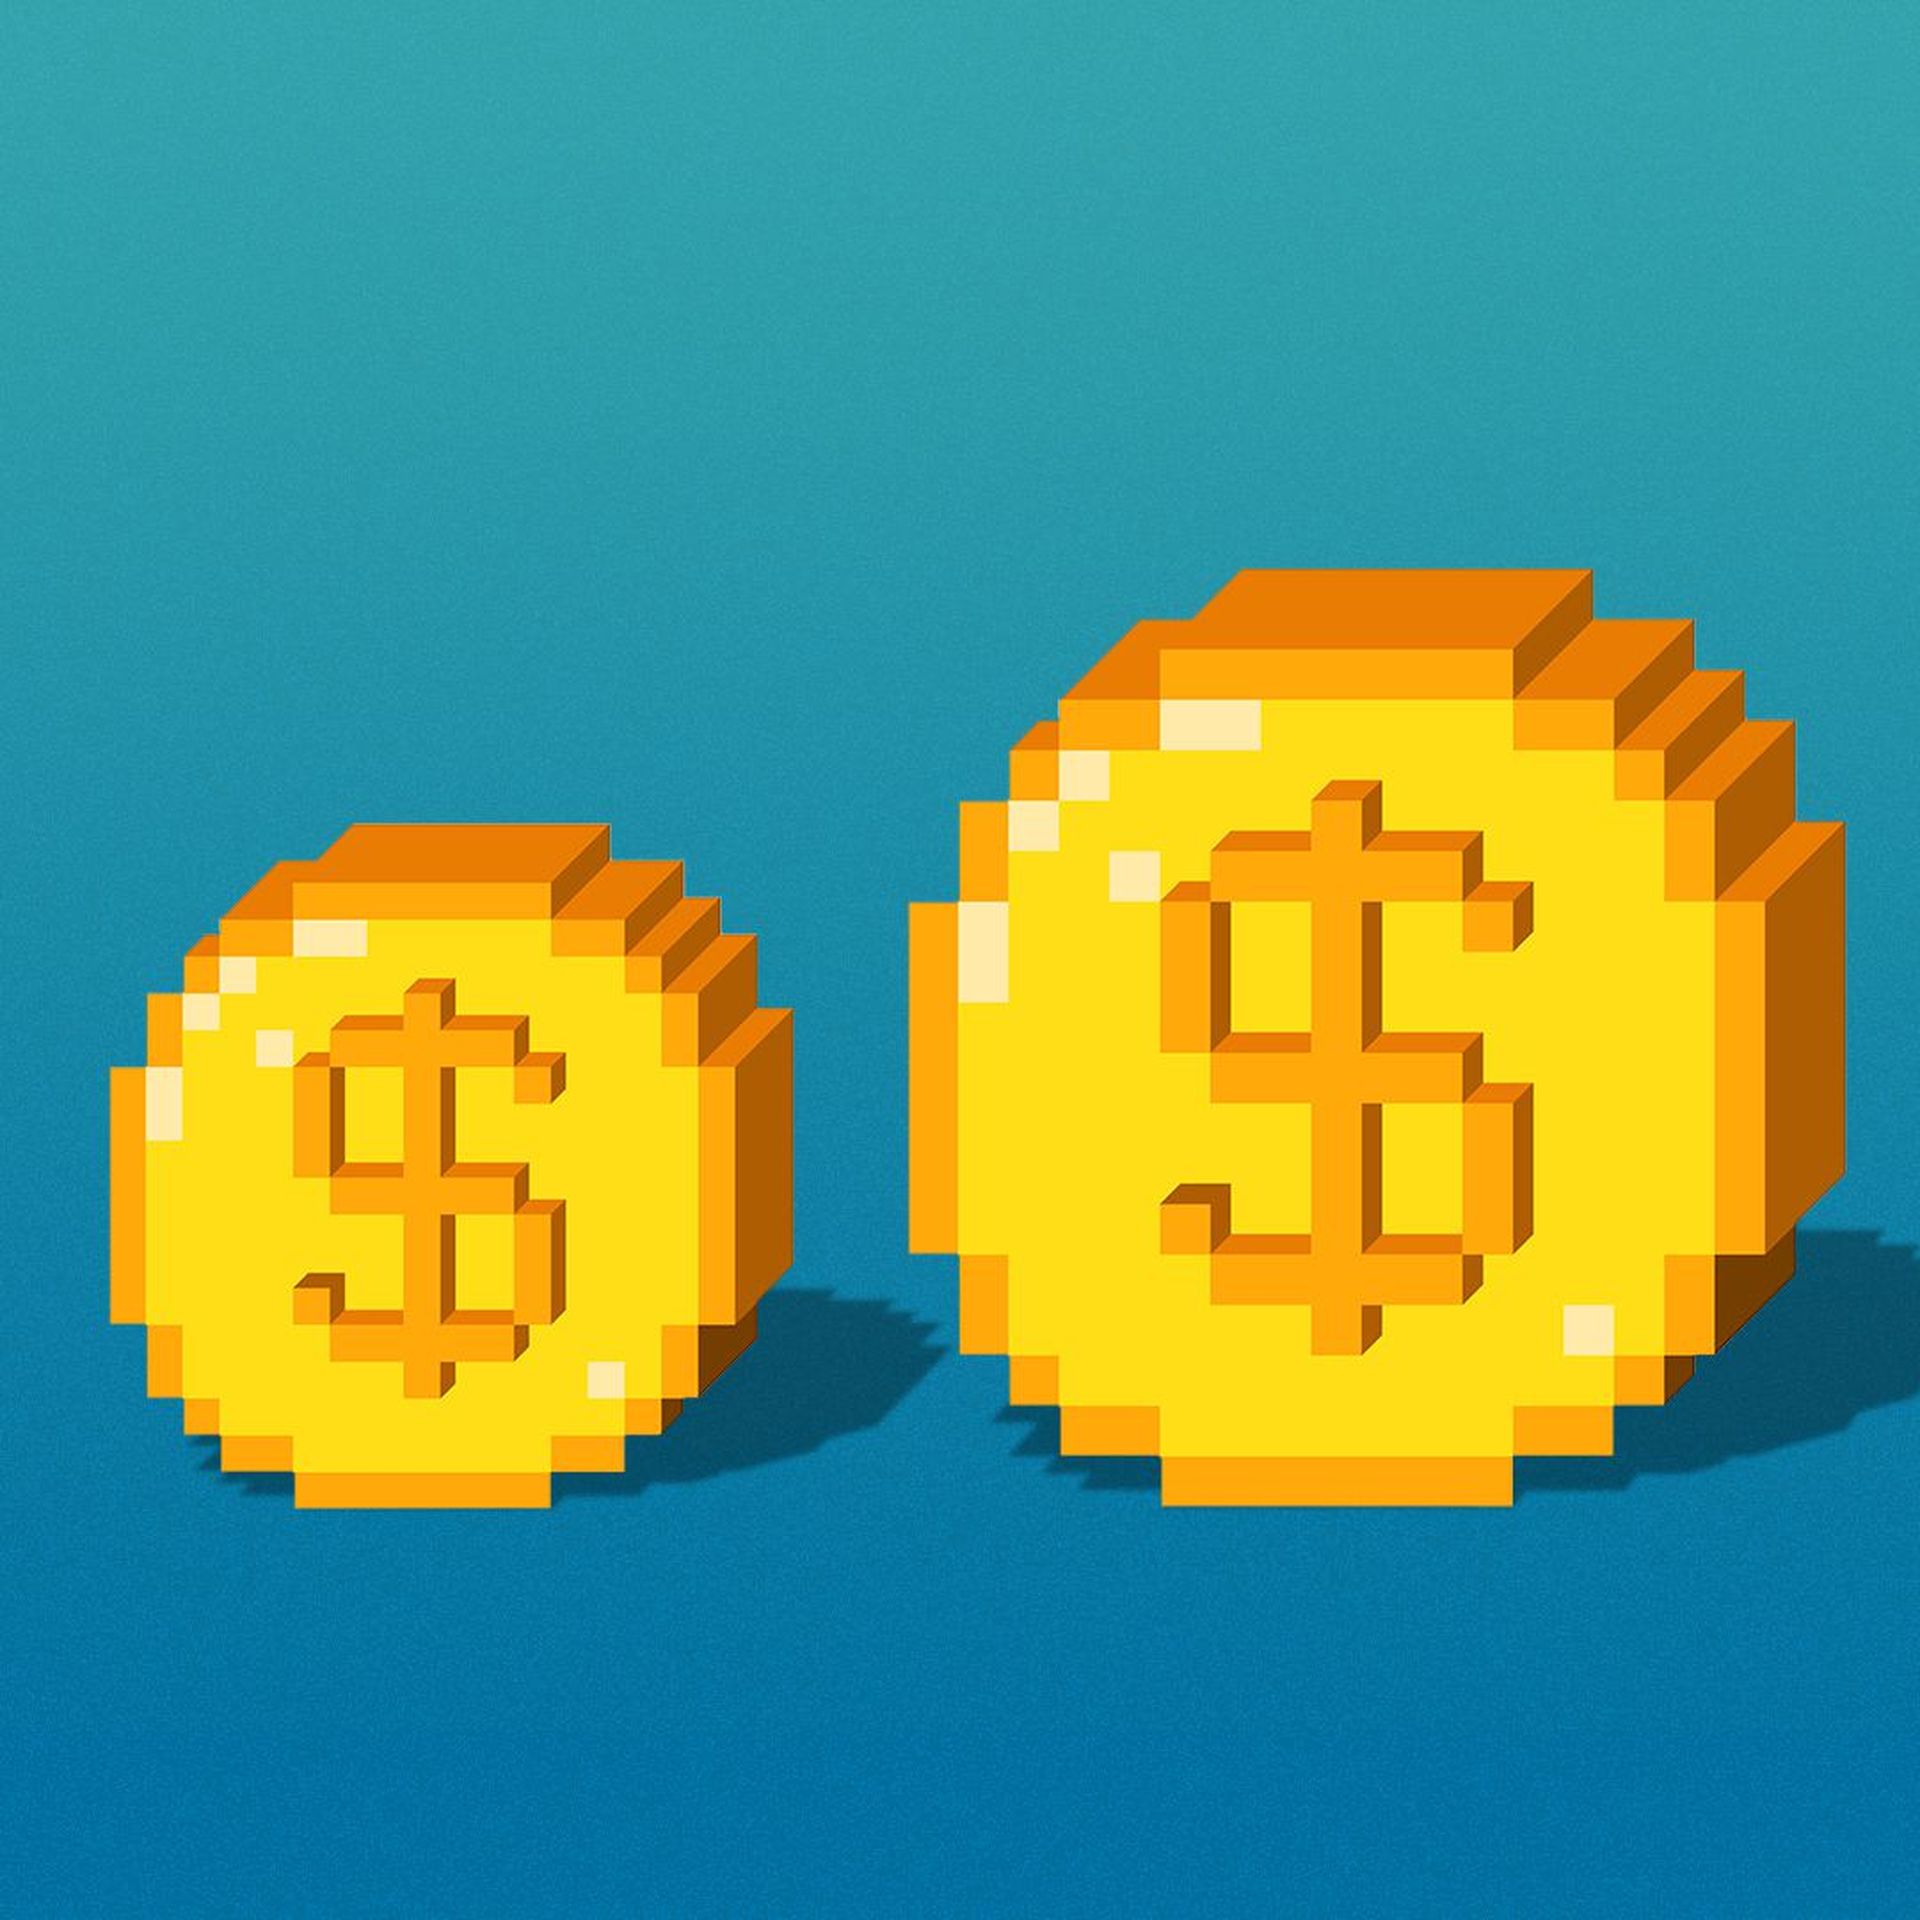 Illustration of pixelated game coins arranged in order of ascending size